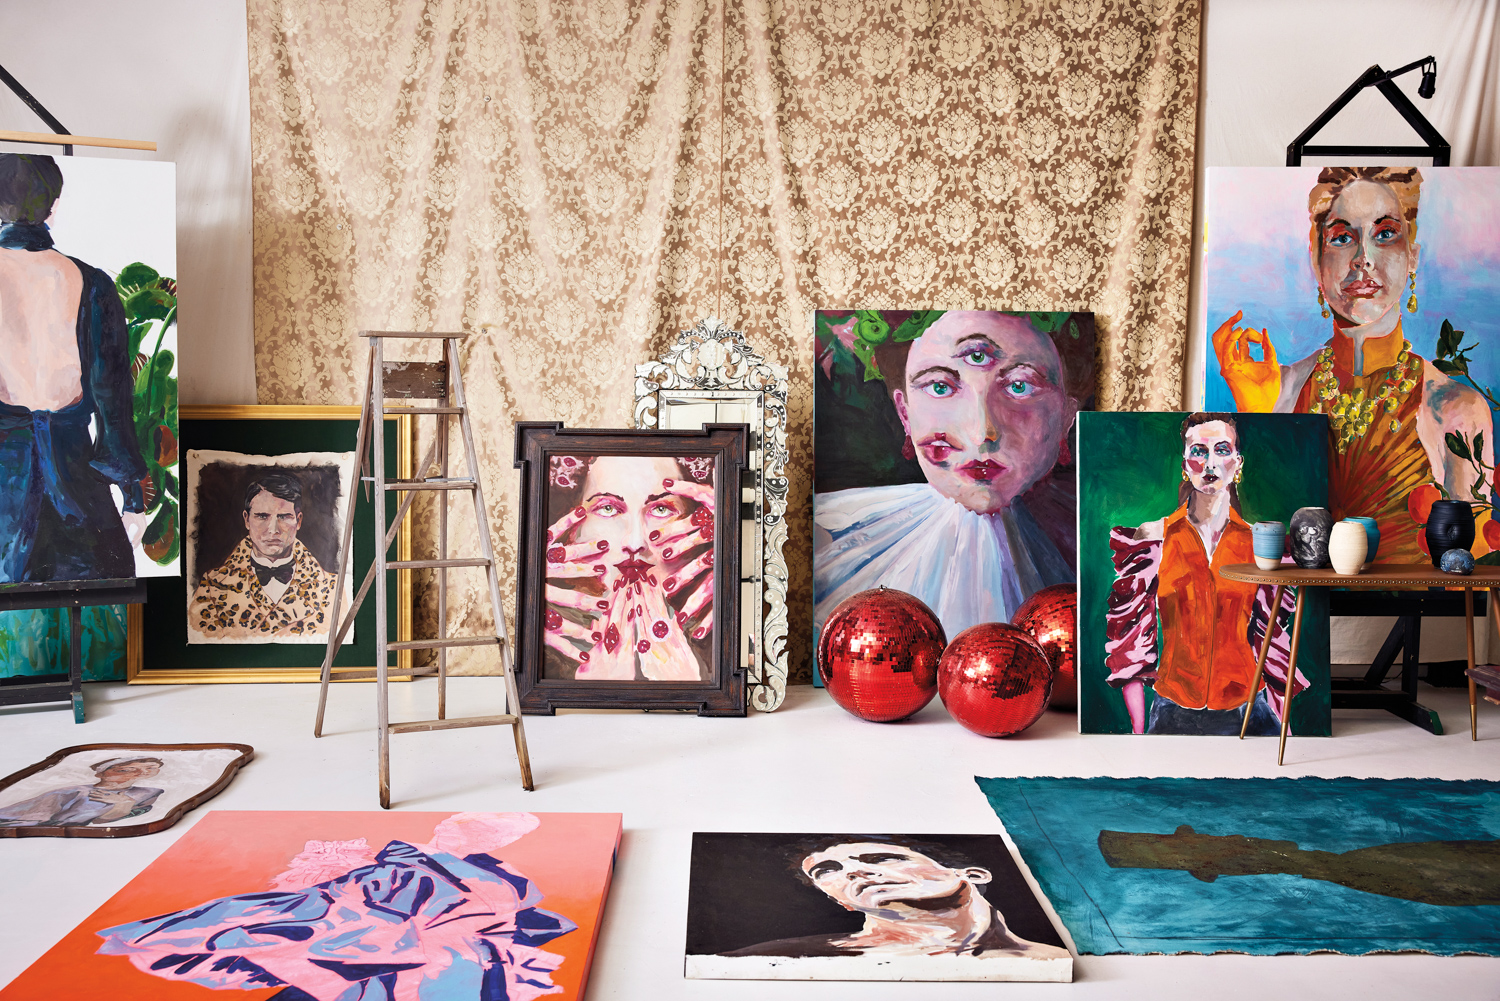 Multiple large artworks by Daniel Zimmerman, draped fabric and red disco balls